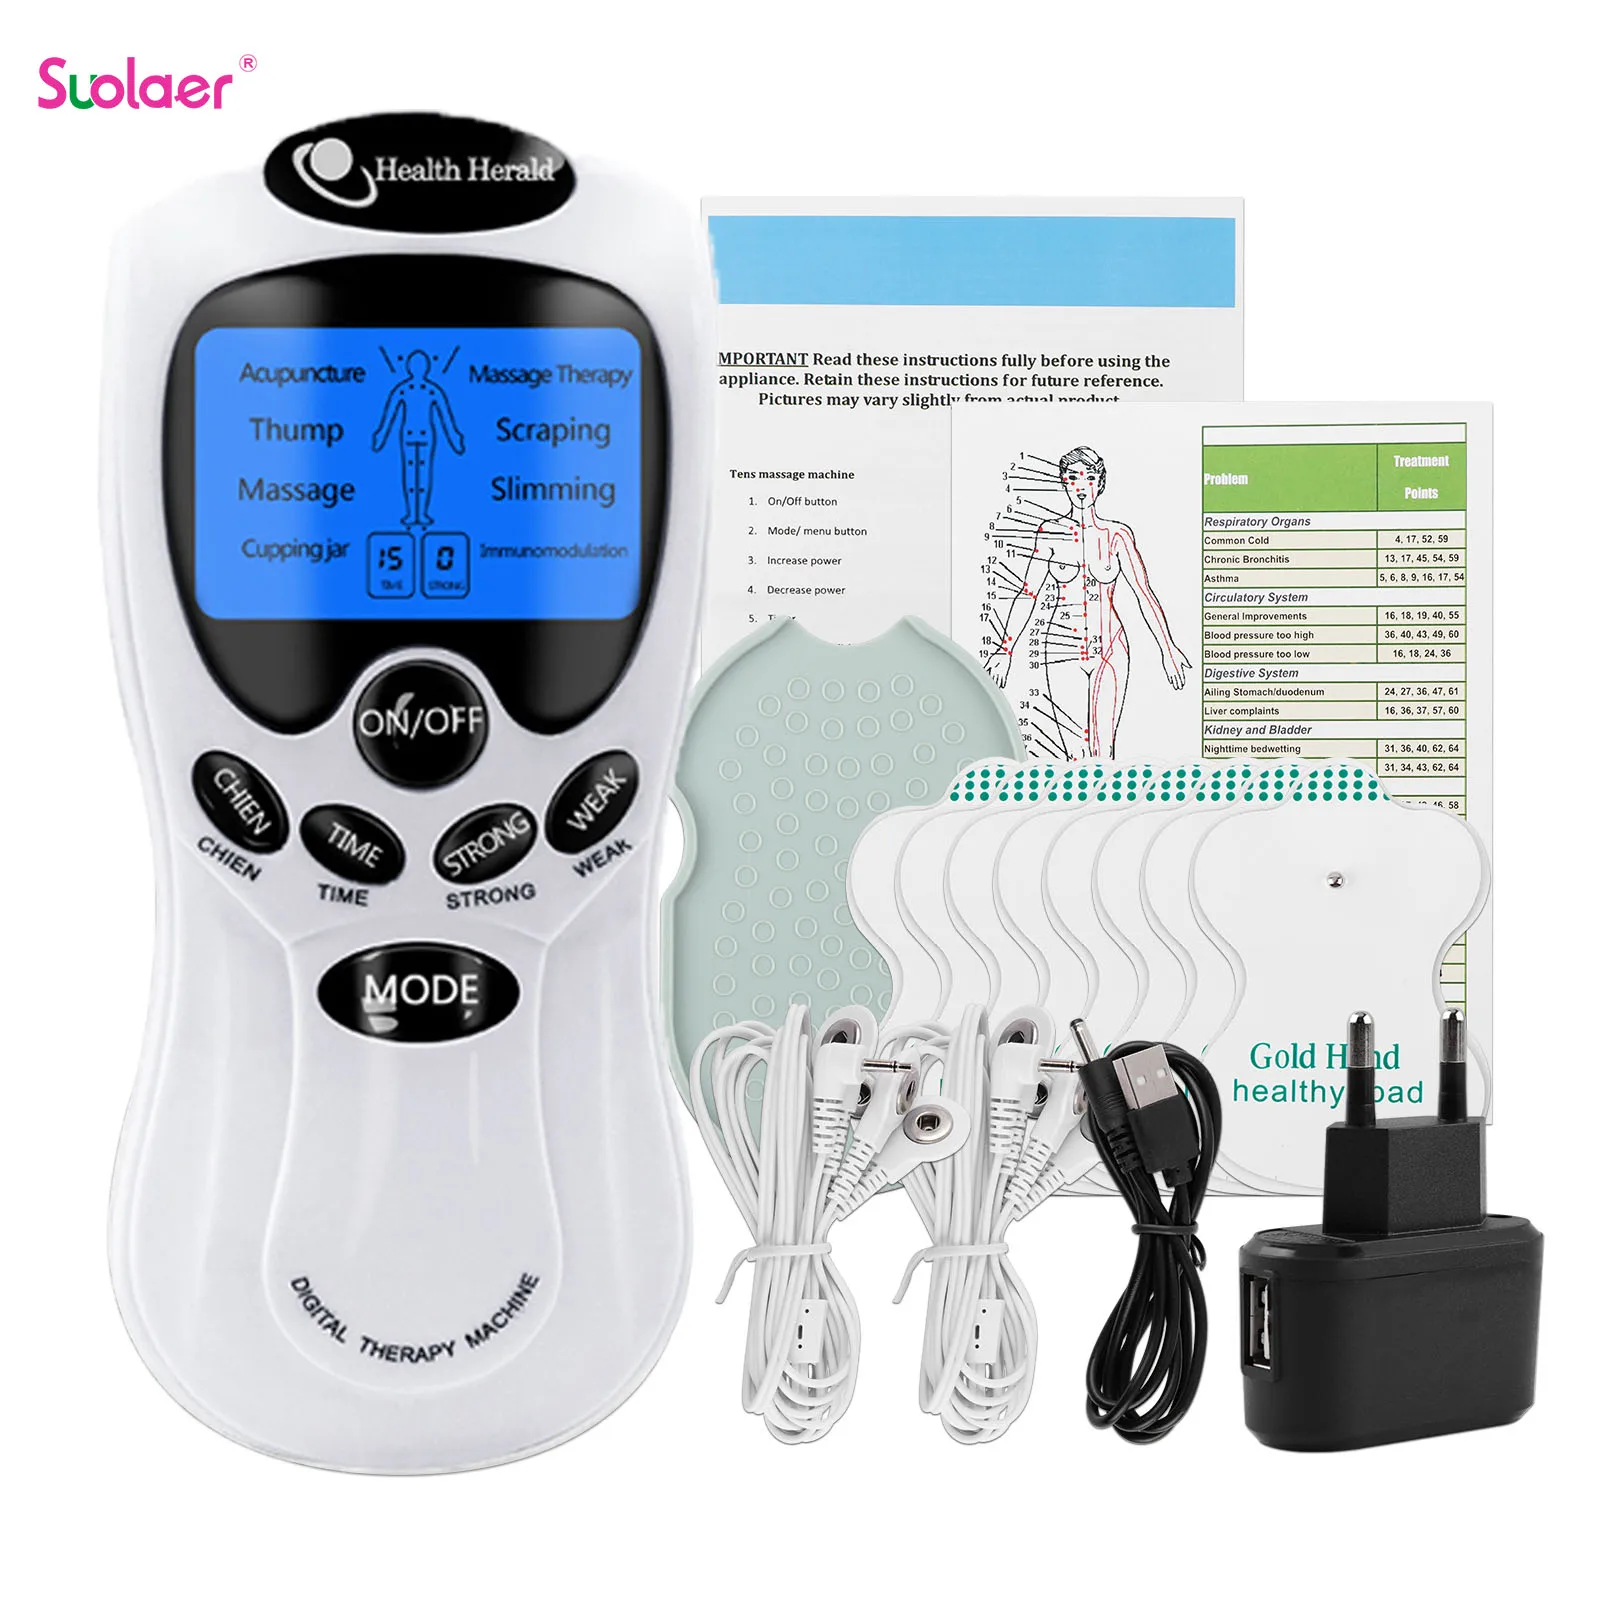 

8-modes Tens Unit EMS Muscle Stimulation Physiotherapy Equipment EMS Microcurrents Low Frequency Pulse Relaxing Meridian Massage